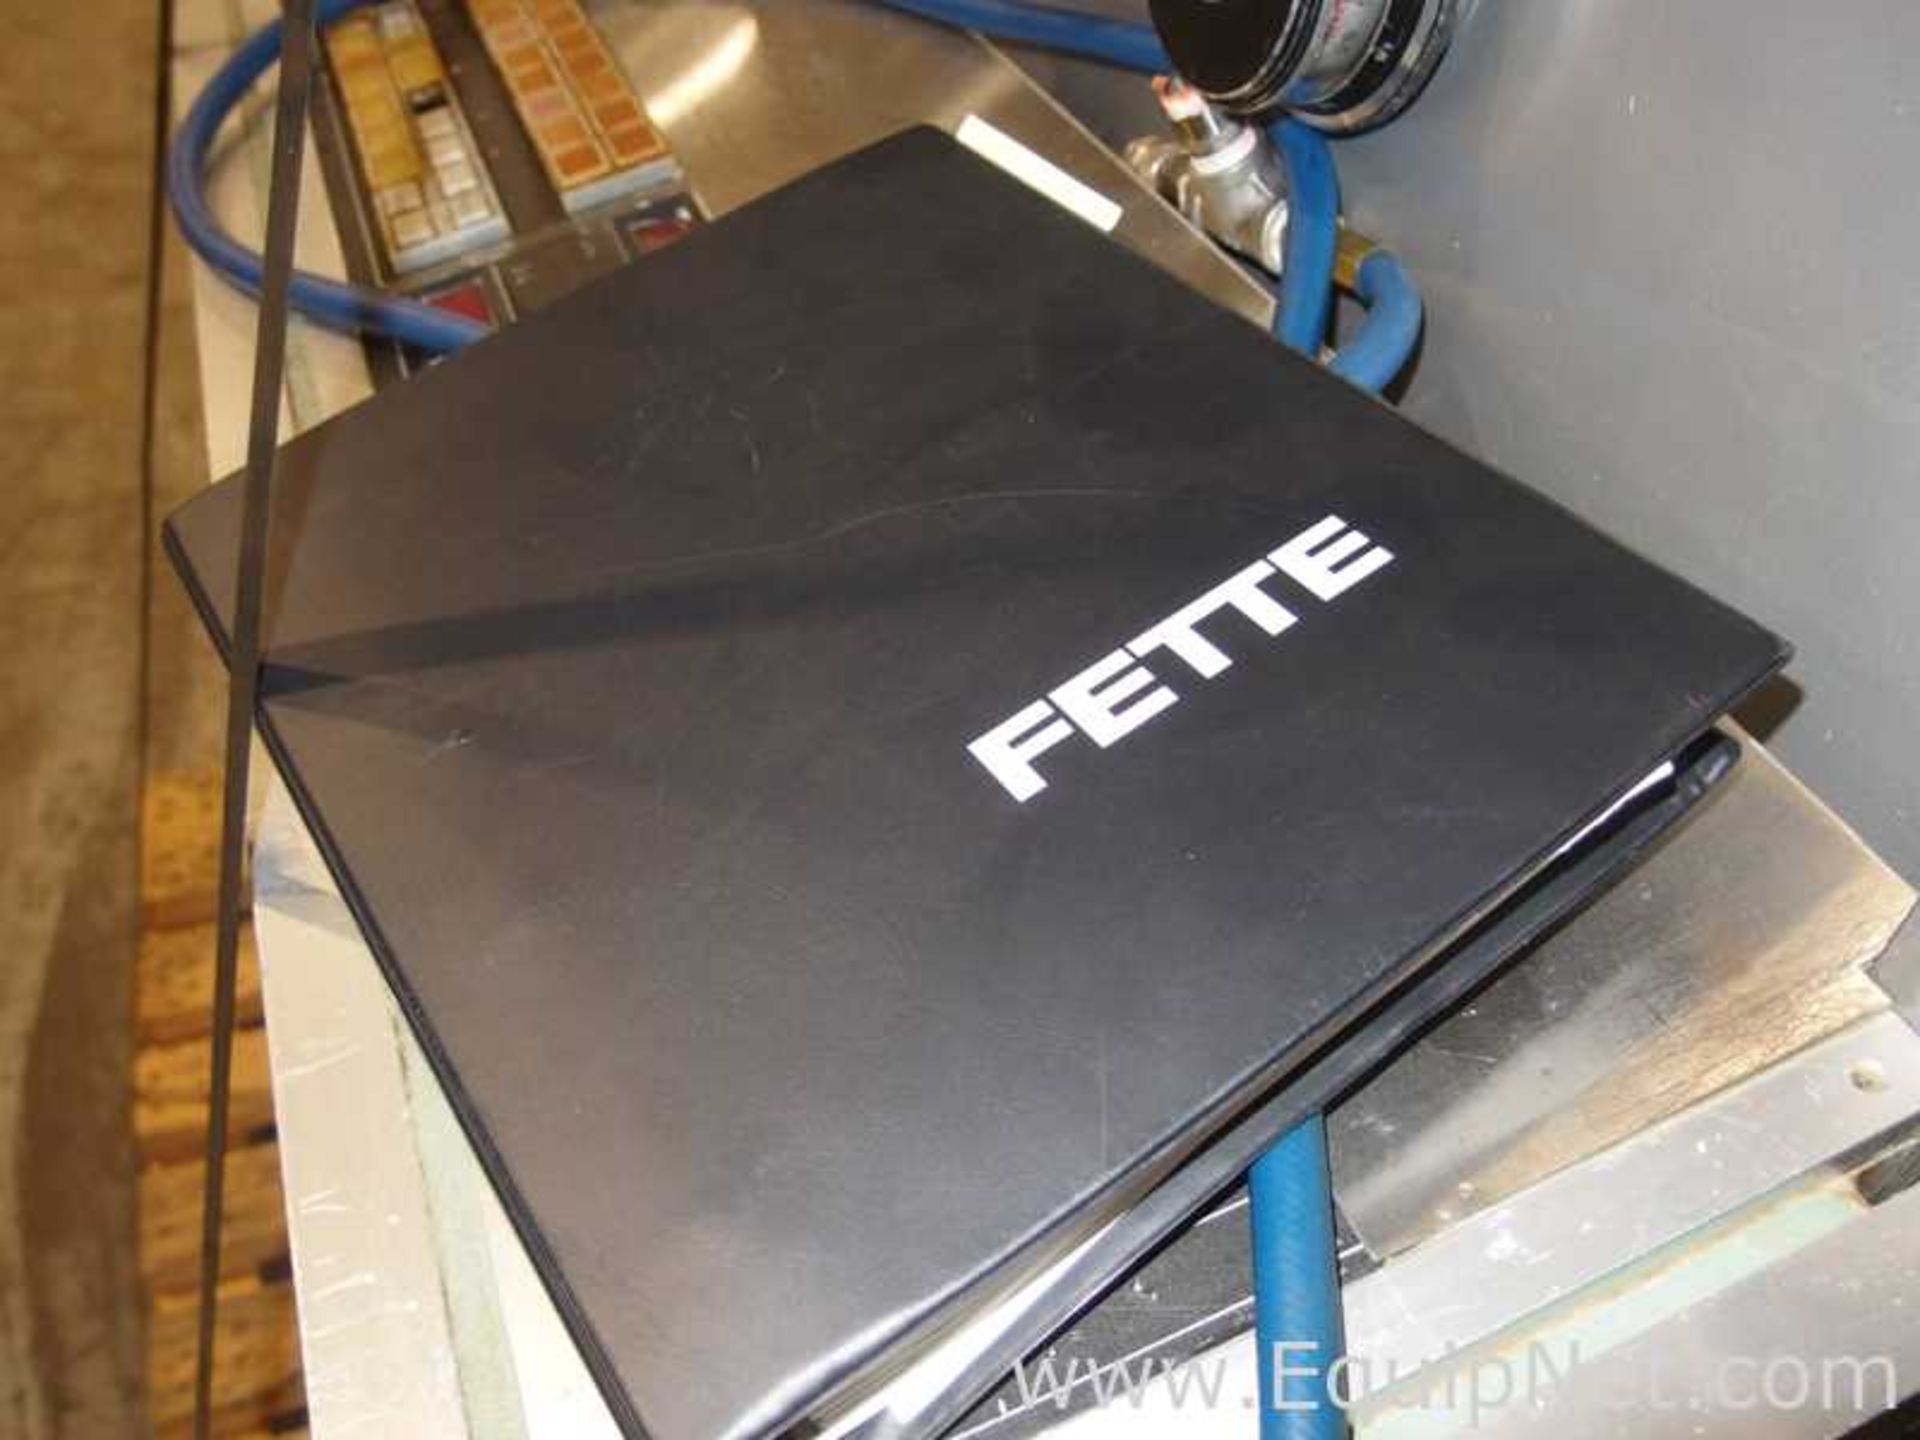 Fette P 2100 Rotary Tablet Press - Image 7 of 10